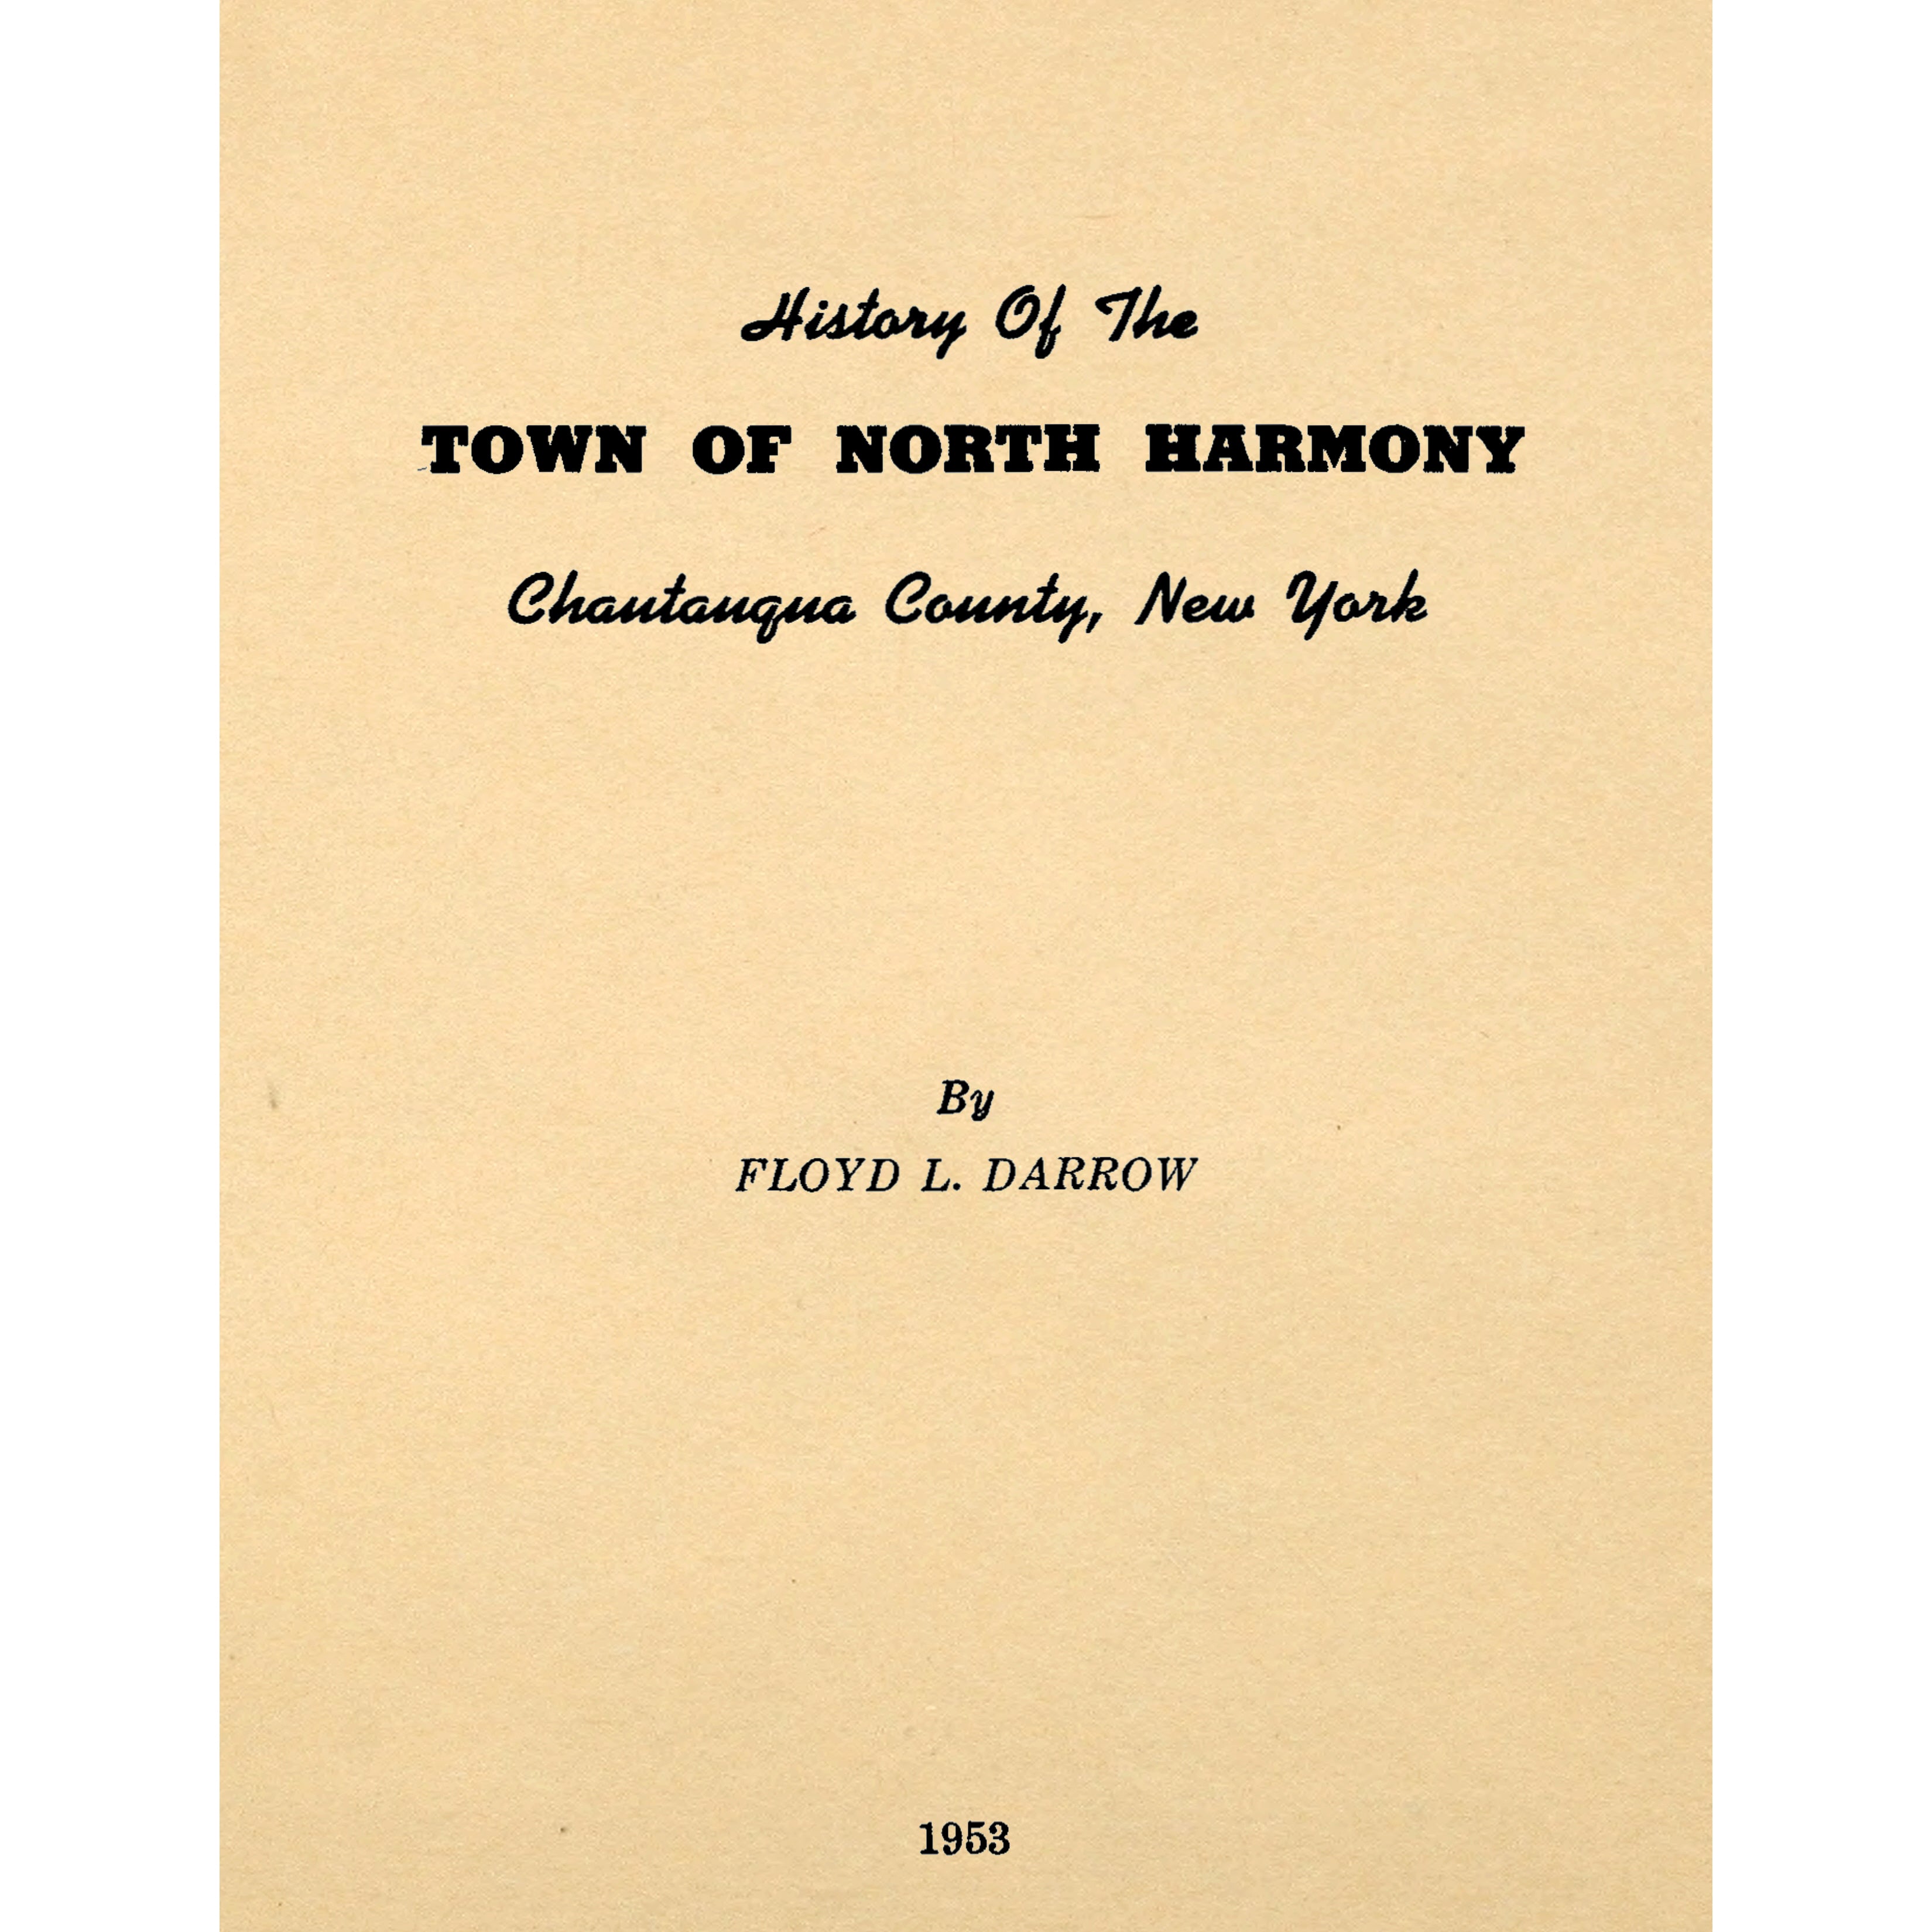 History of the Town of North Harmony, Chautaugua county, New York.  2 volumes in 1